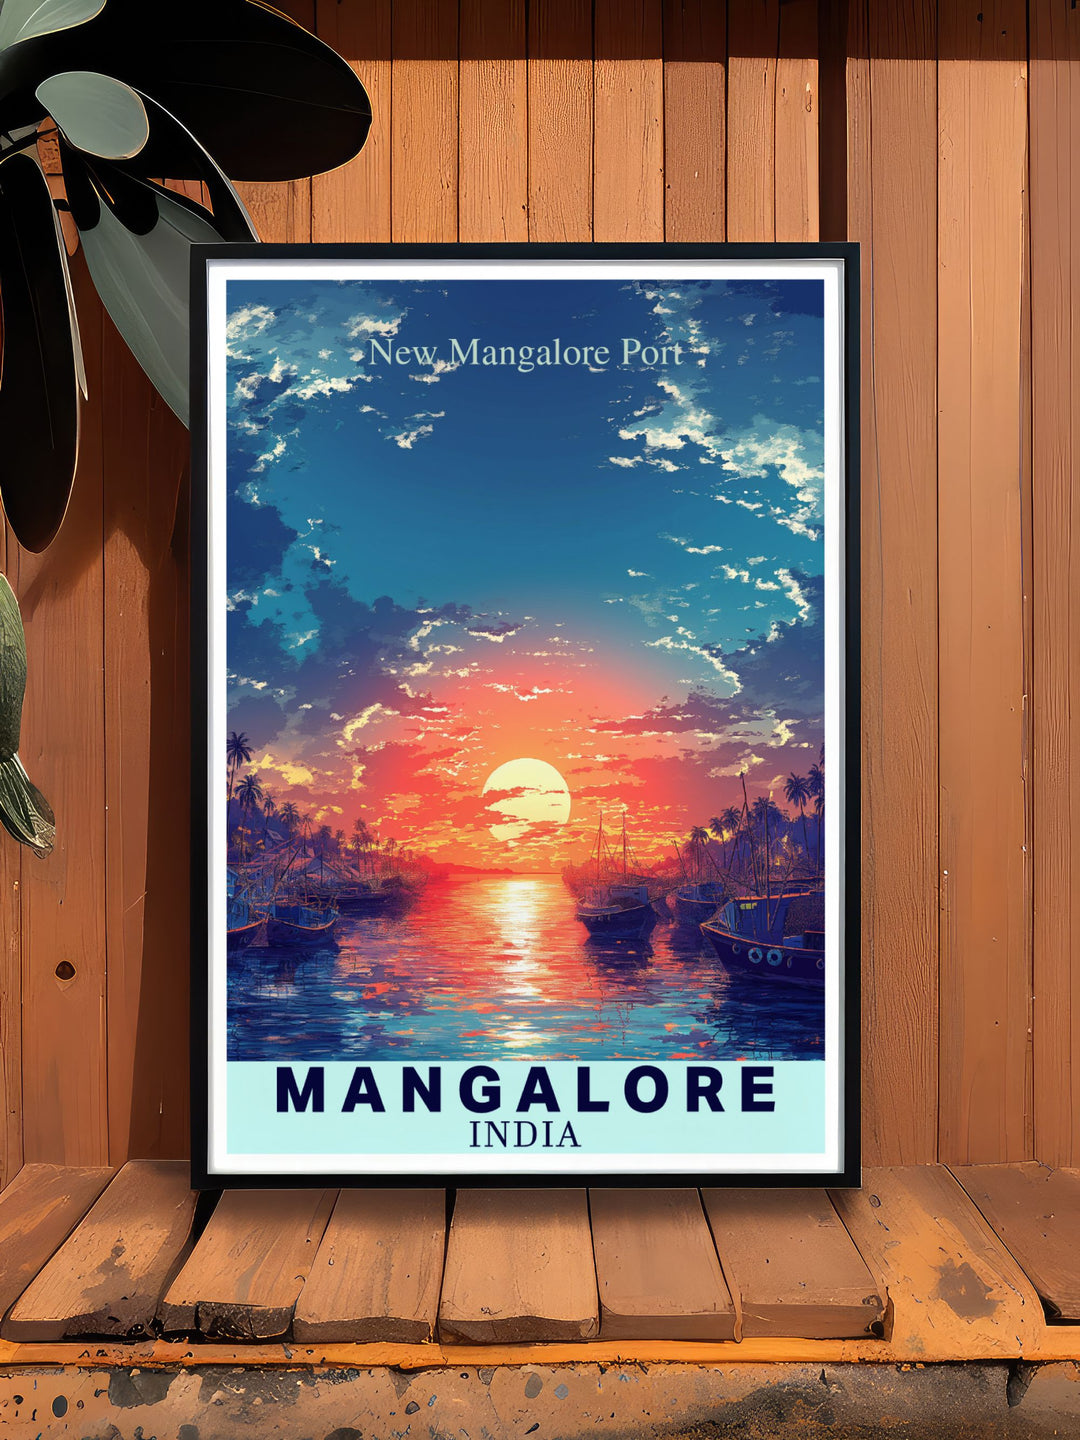 This art print captures the essence of Mangalores vibrant urban life and the strategic importance of New Mangalore Port, making it a perfect addition to any home or office decor for those who love maritime and cityscapes.